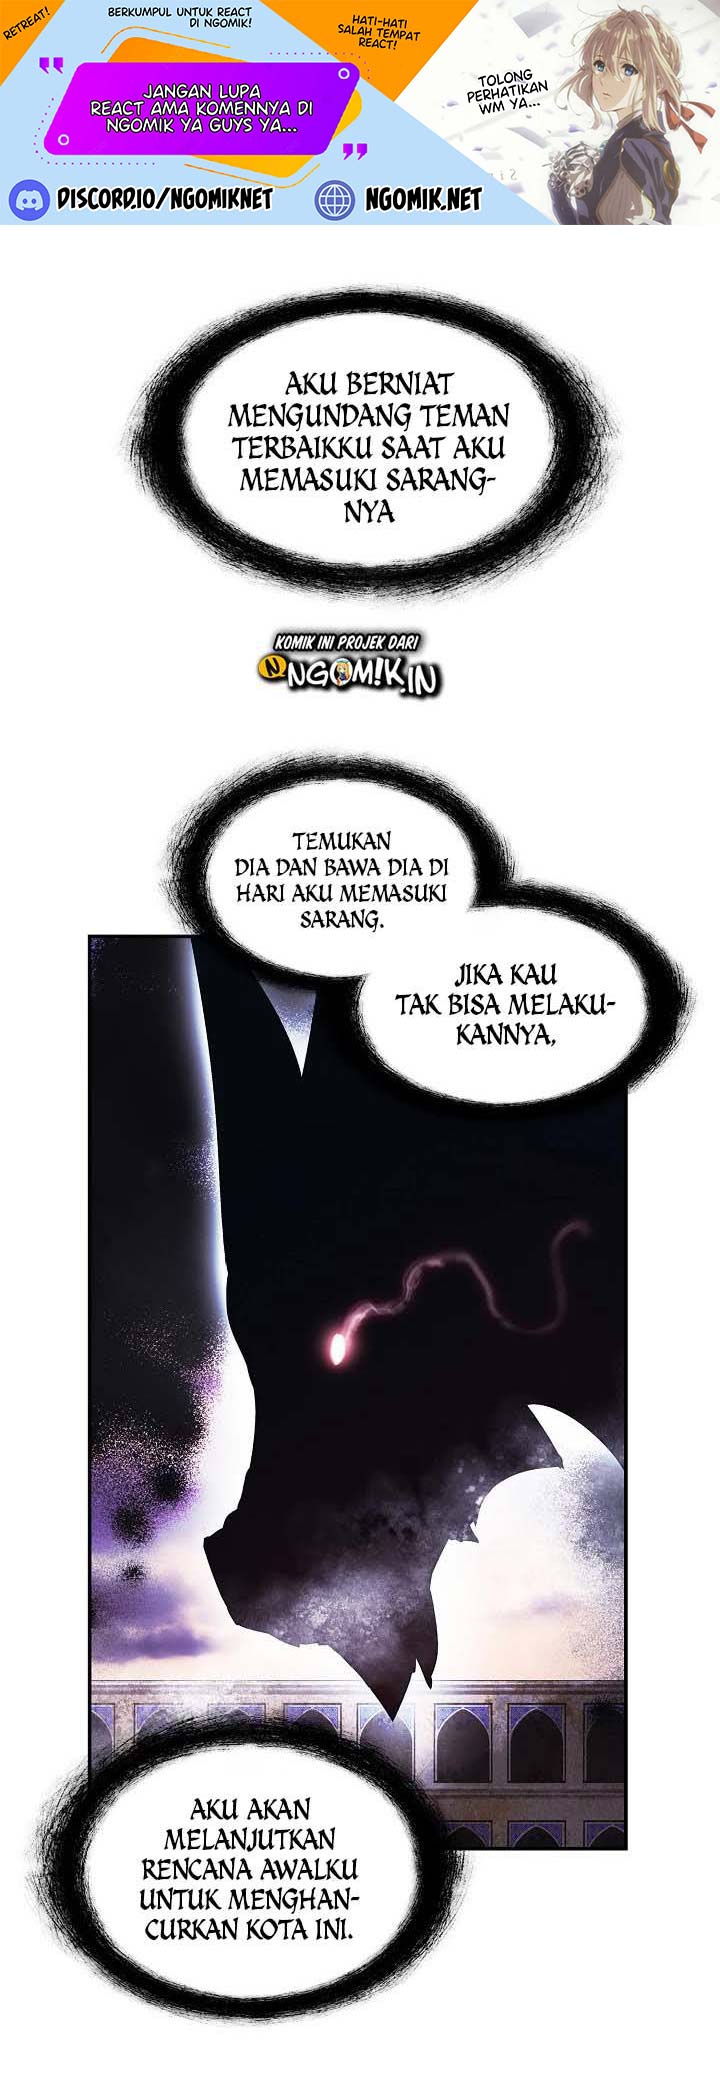 Mookhyang Dark Lady Chapter 152